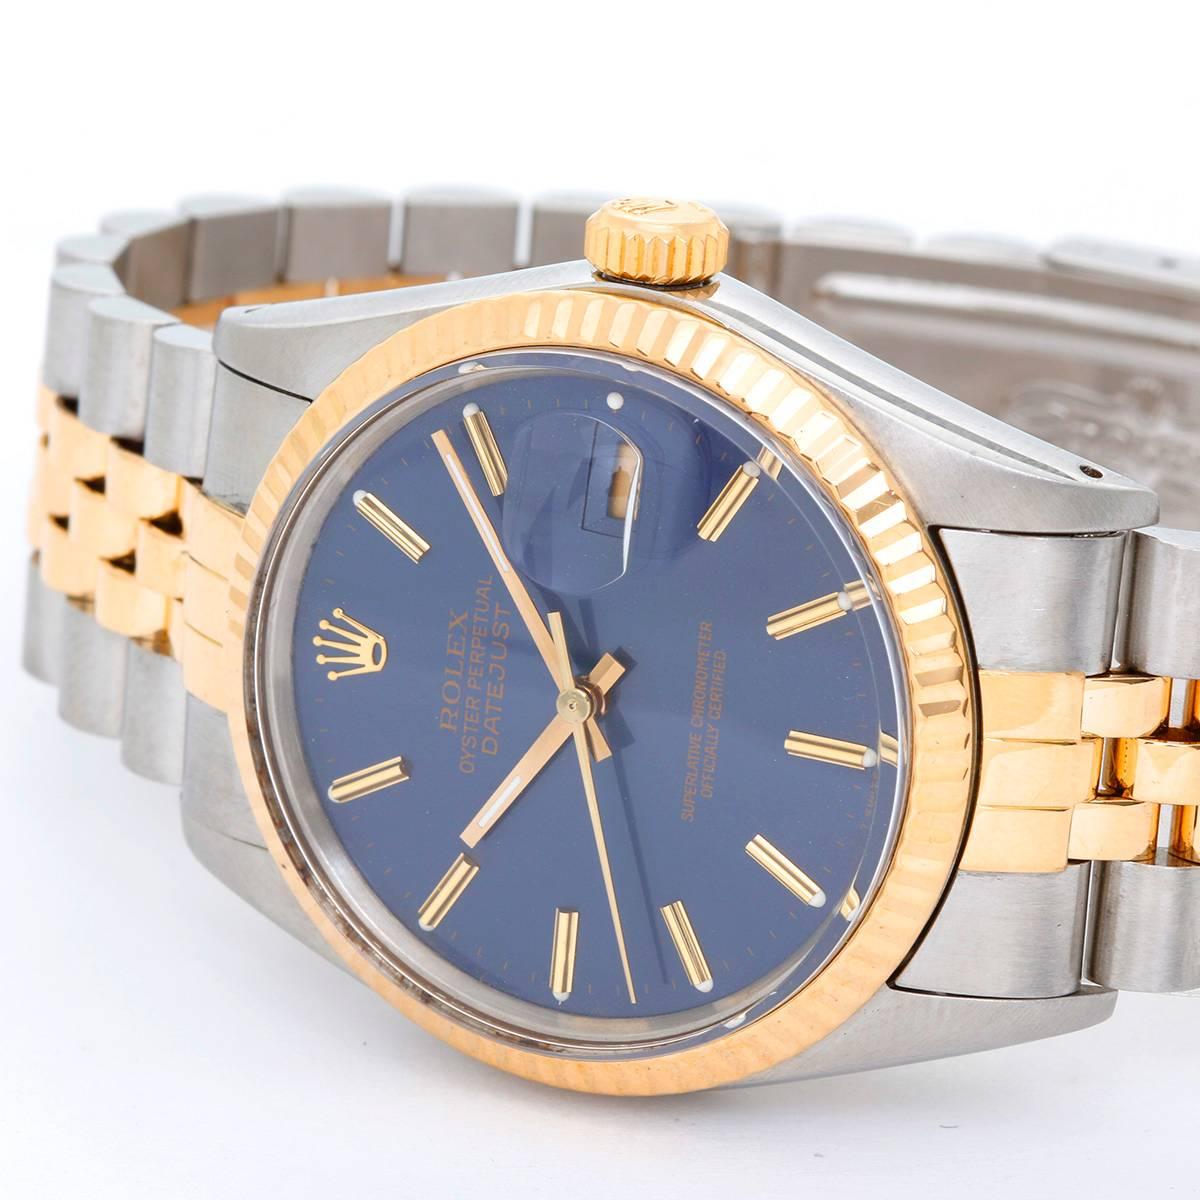 Rolex Datejust Men's 2-Tone Watch 16013 -  Automatic winding, 27 jewels, Quickset, acrylic crystal. Stainless steel case with 18k yellow gold fluted bezel (36mm diameter). Blue dial with gold stick markers. Stainless steel and 18k yellow gold